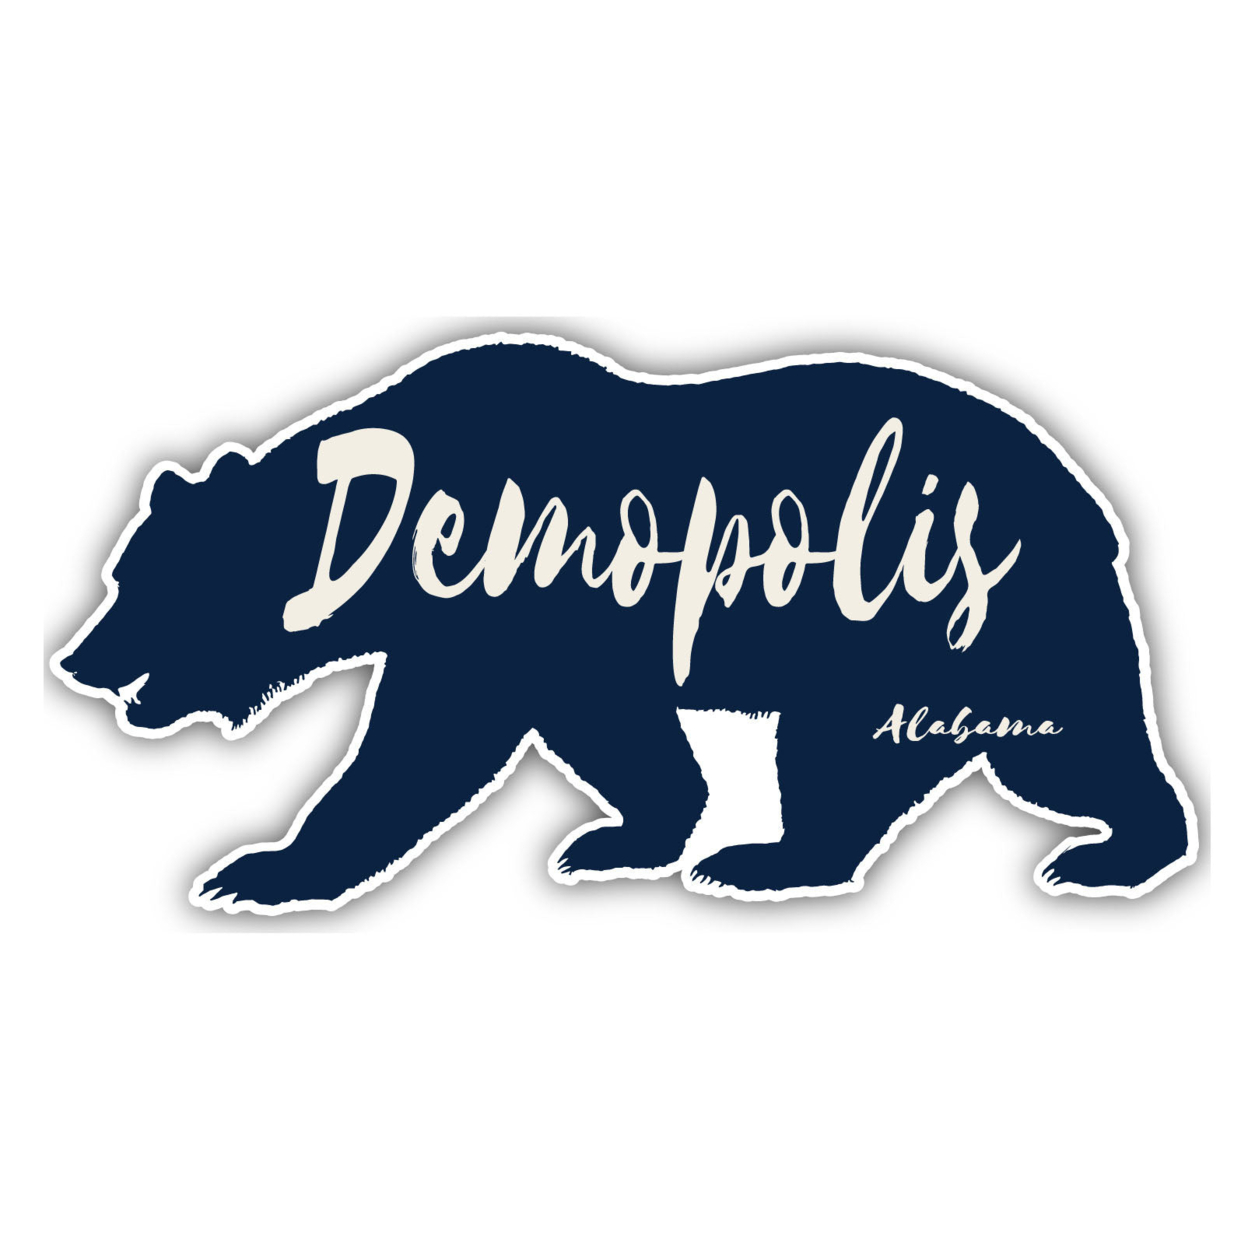 Demopolis Alabama Souvenir Decorative Stickers (Choose Theme And Size) - 4-Pack, 8-Inch, Great Outdoors